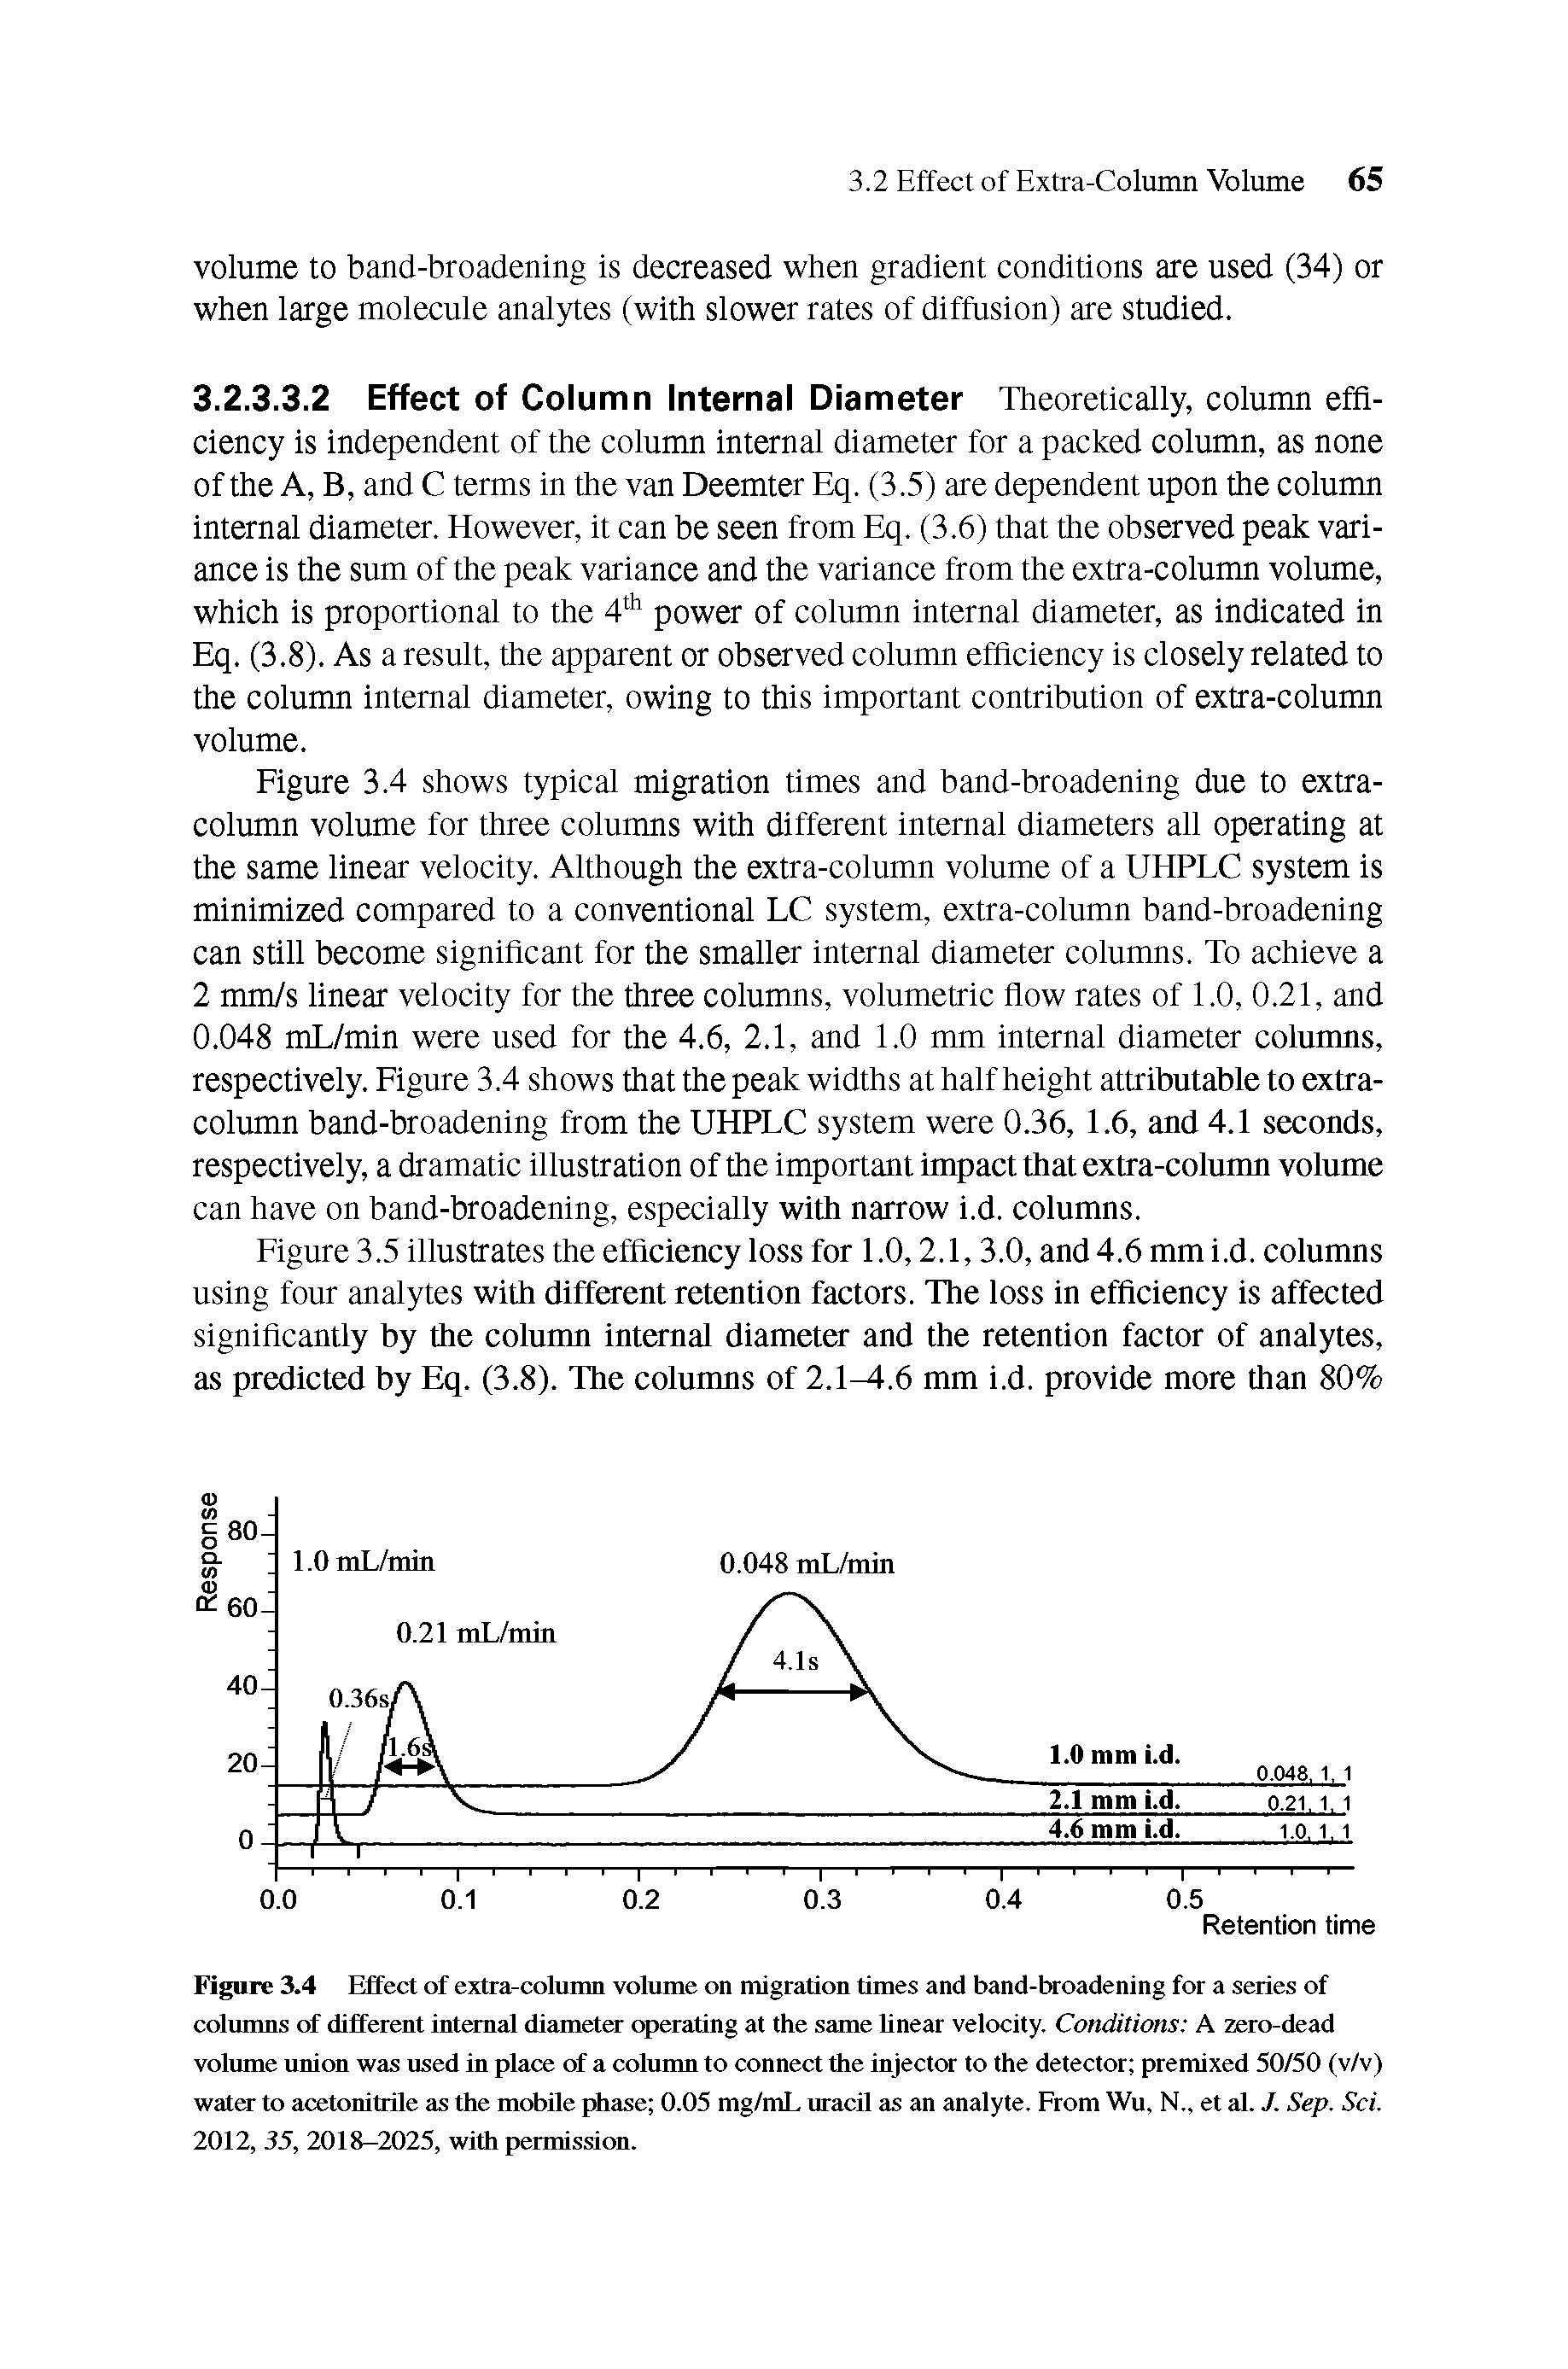 Figure 3.4 Effect of extra-column volume on migration times and band-broadening for a series of columns of different internal diameter operating at the same linear velocity. Conditions A zero-dead volume union was used in place of a column to connect the injector to the detector premixed 50/50 (v/v) water to acetonitrile as the mobile phase 0.05 mg/mL uracil as an analyte. From Wu, N., et al. J. Sep. Set 2012, 35, 2018-2025, with permission.